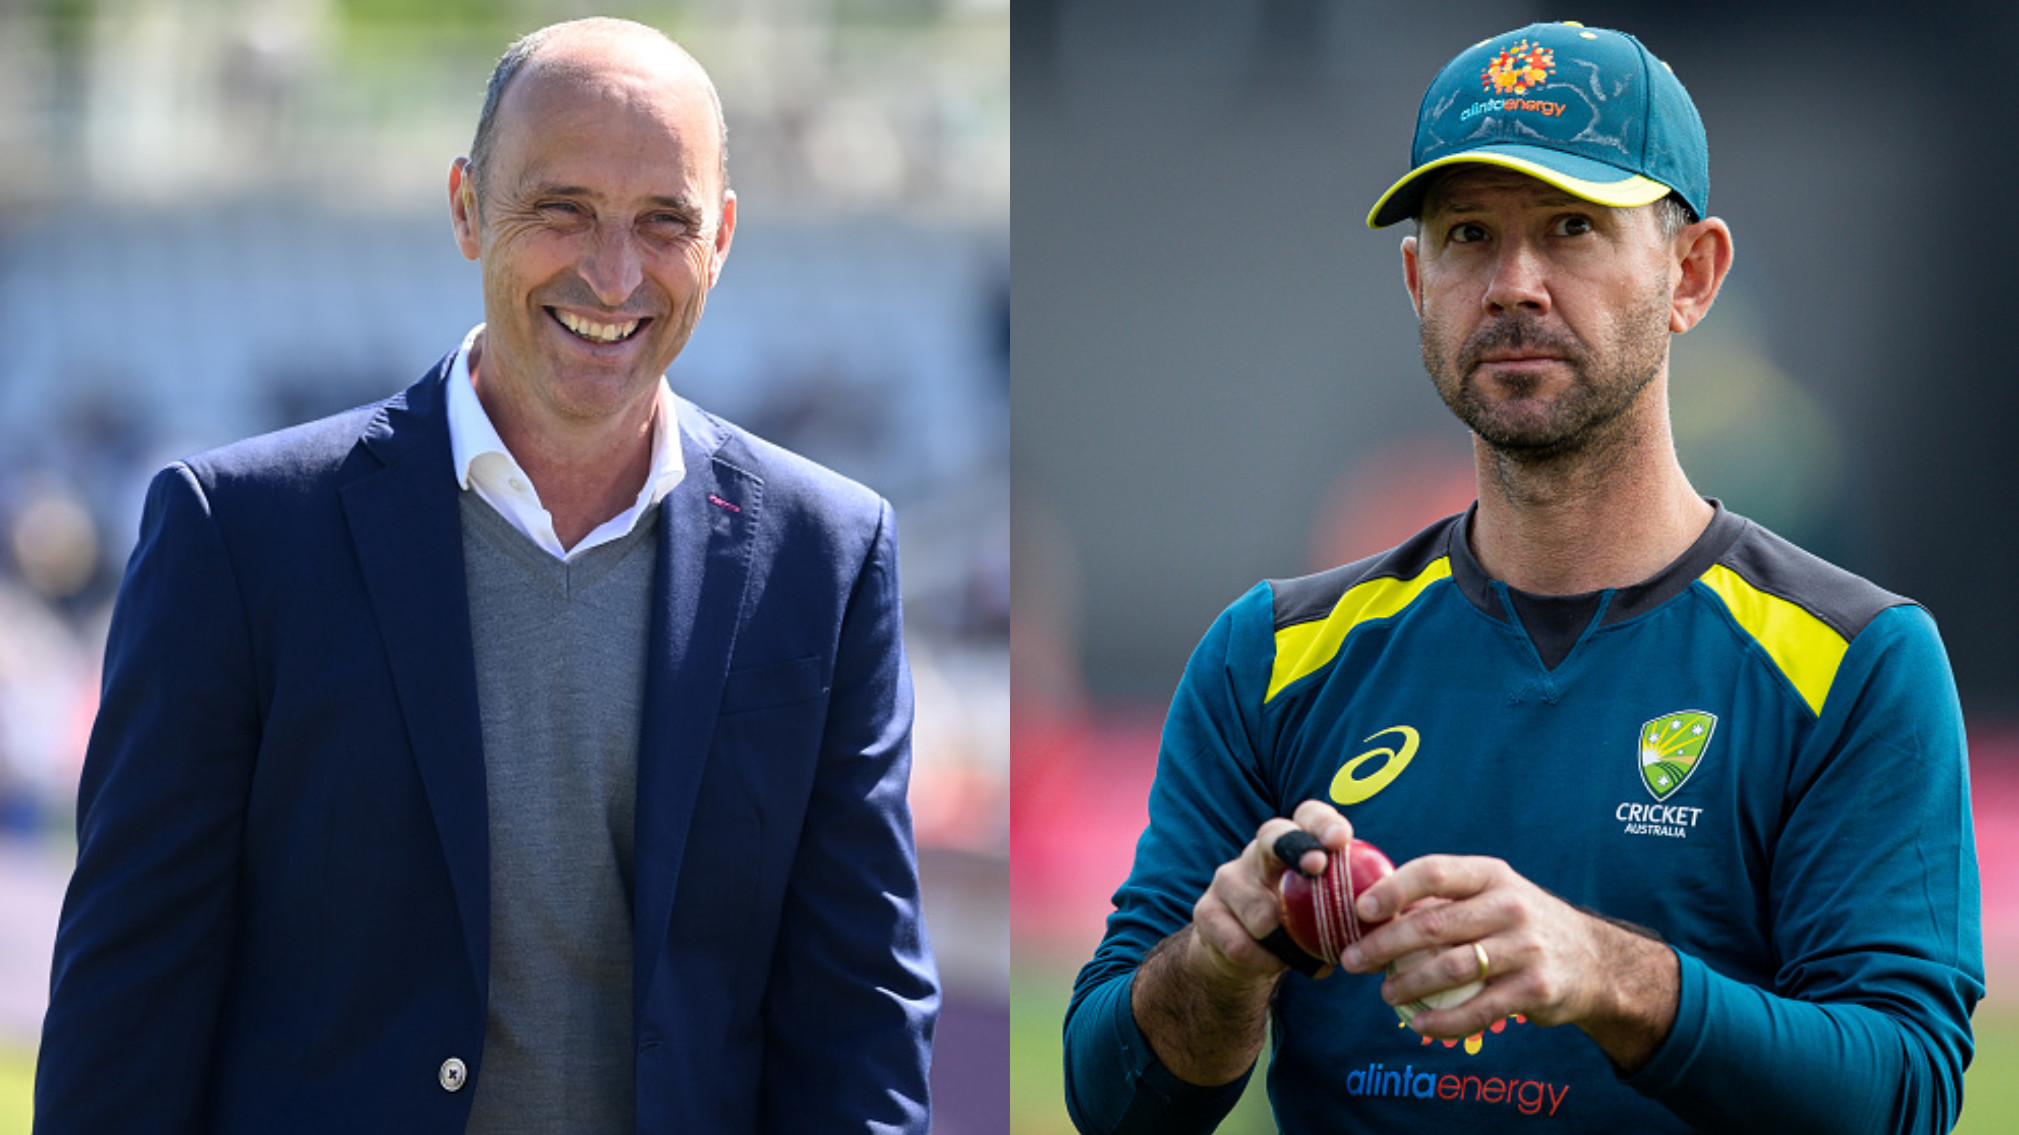 Nasser Hussain bats for Ricky Ponting as next England coach; praises his great cricketing brain